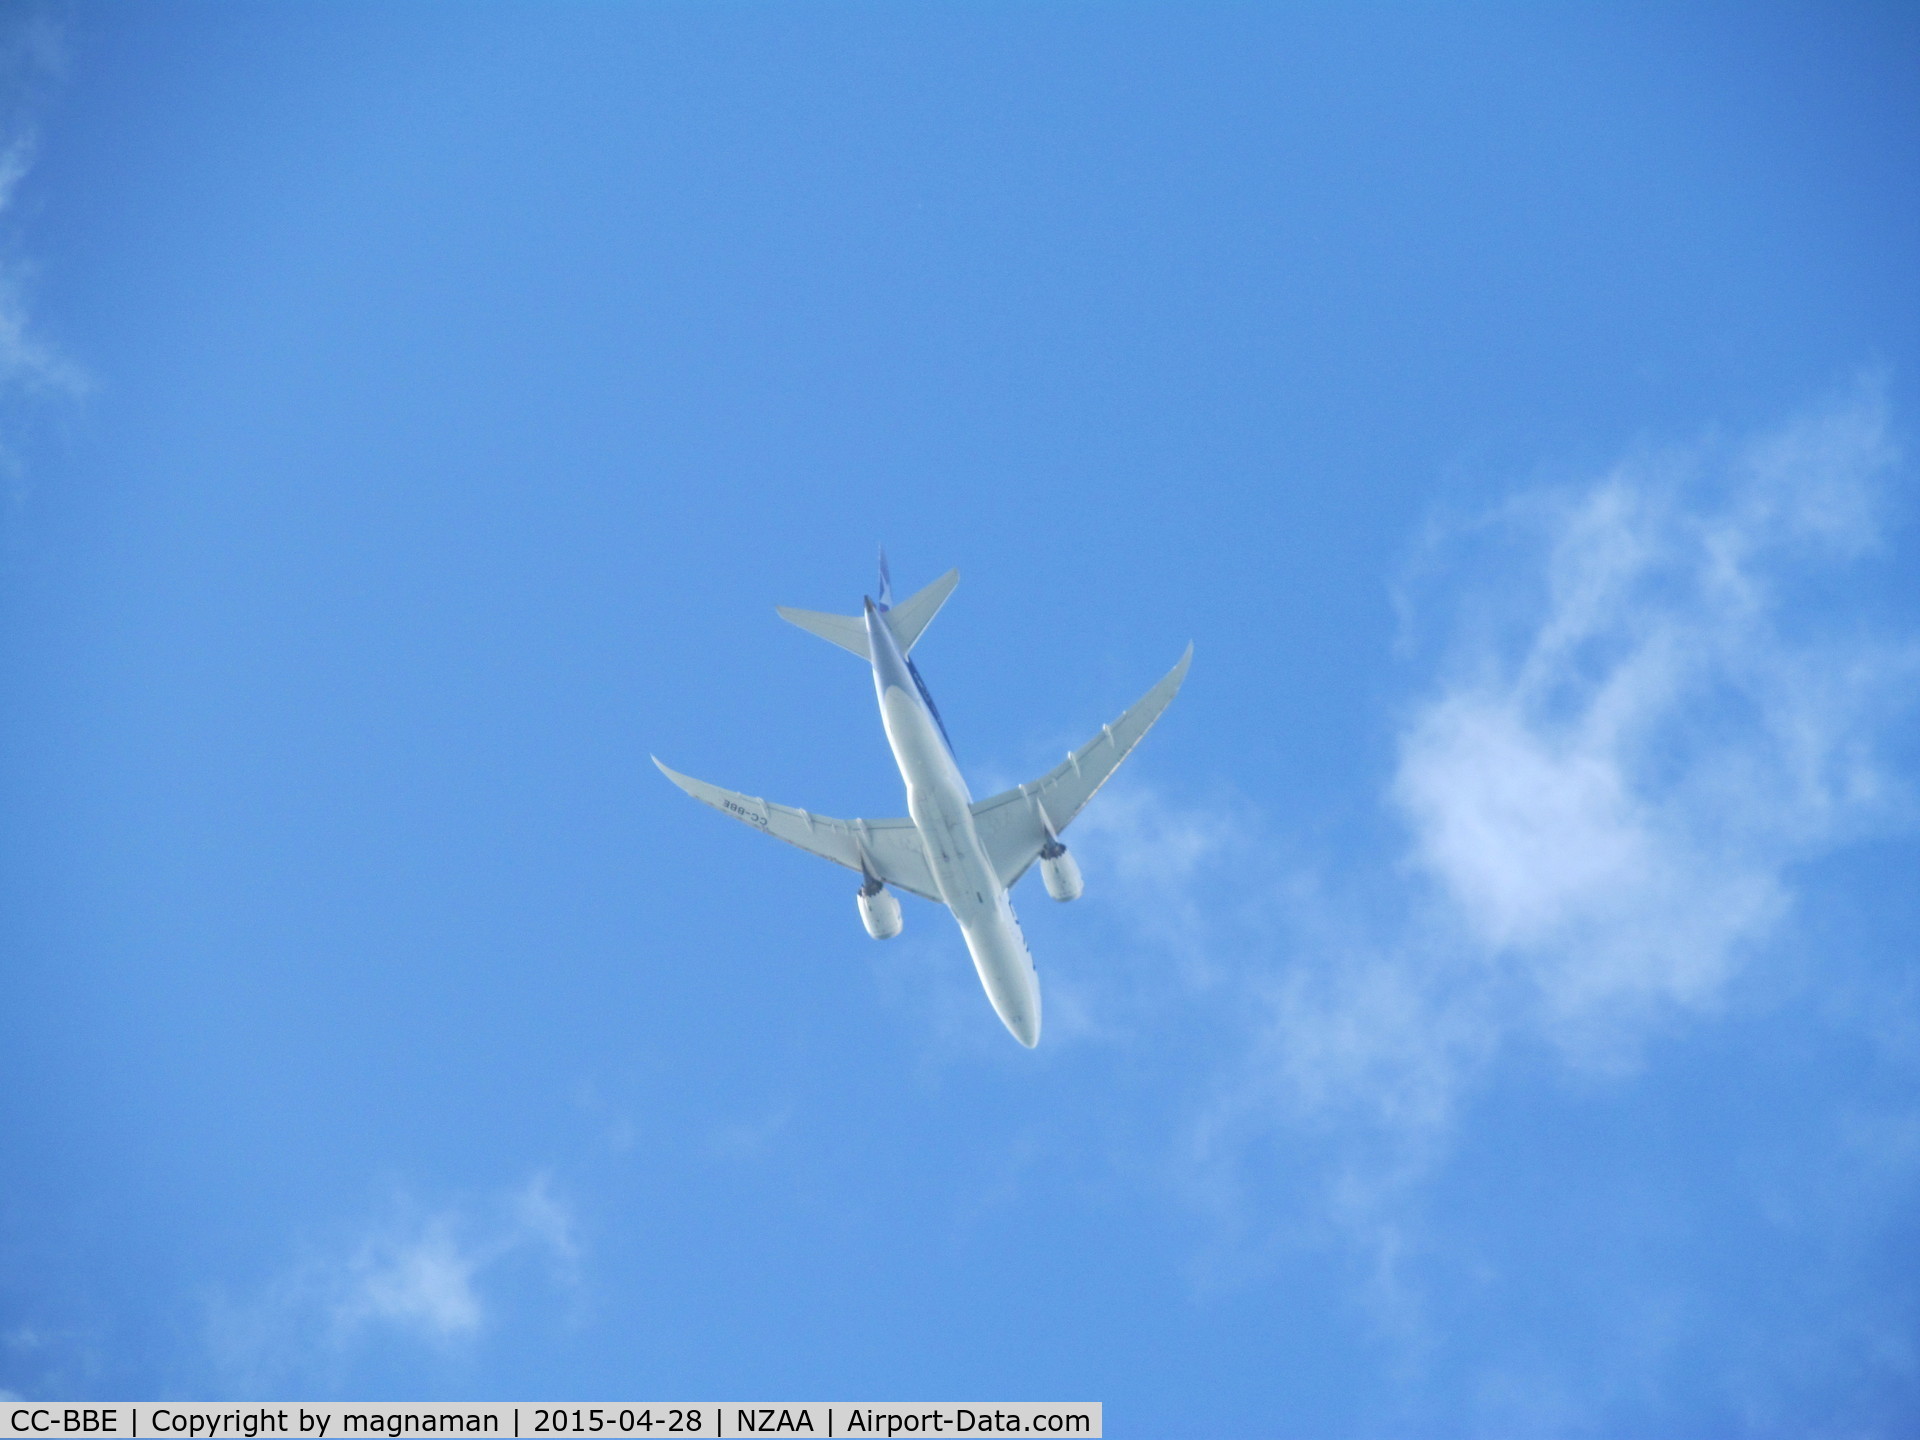 CC-BBE, 2013 Boeing 787-8 Dreamliner C/N 38473, flying over home on way into AKL today.